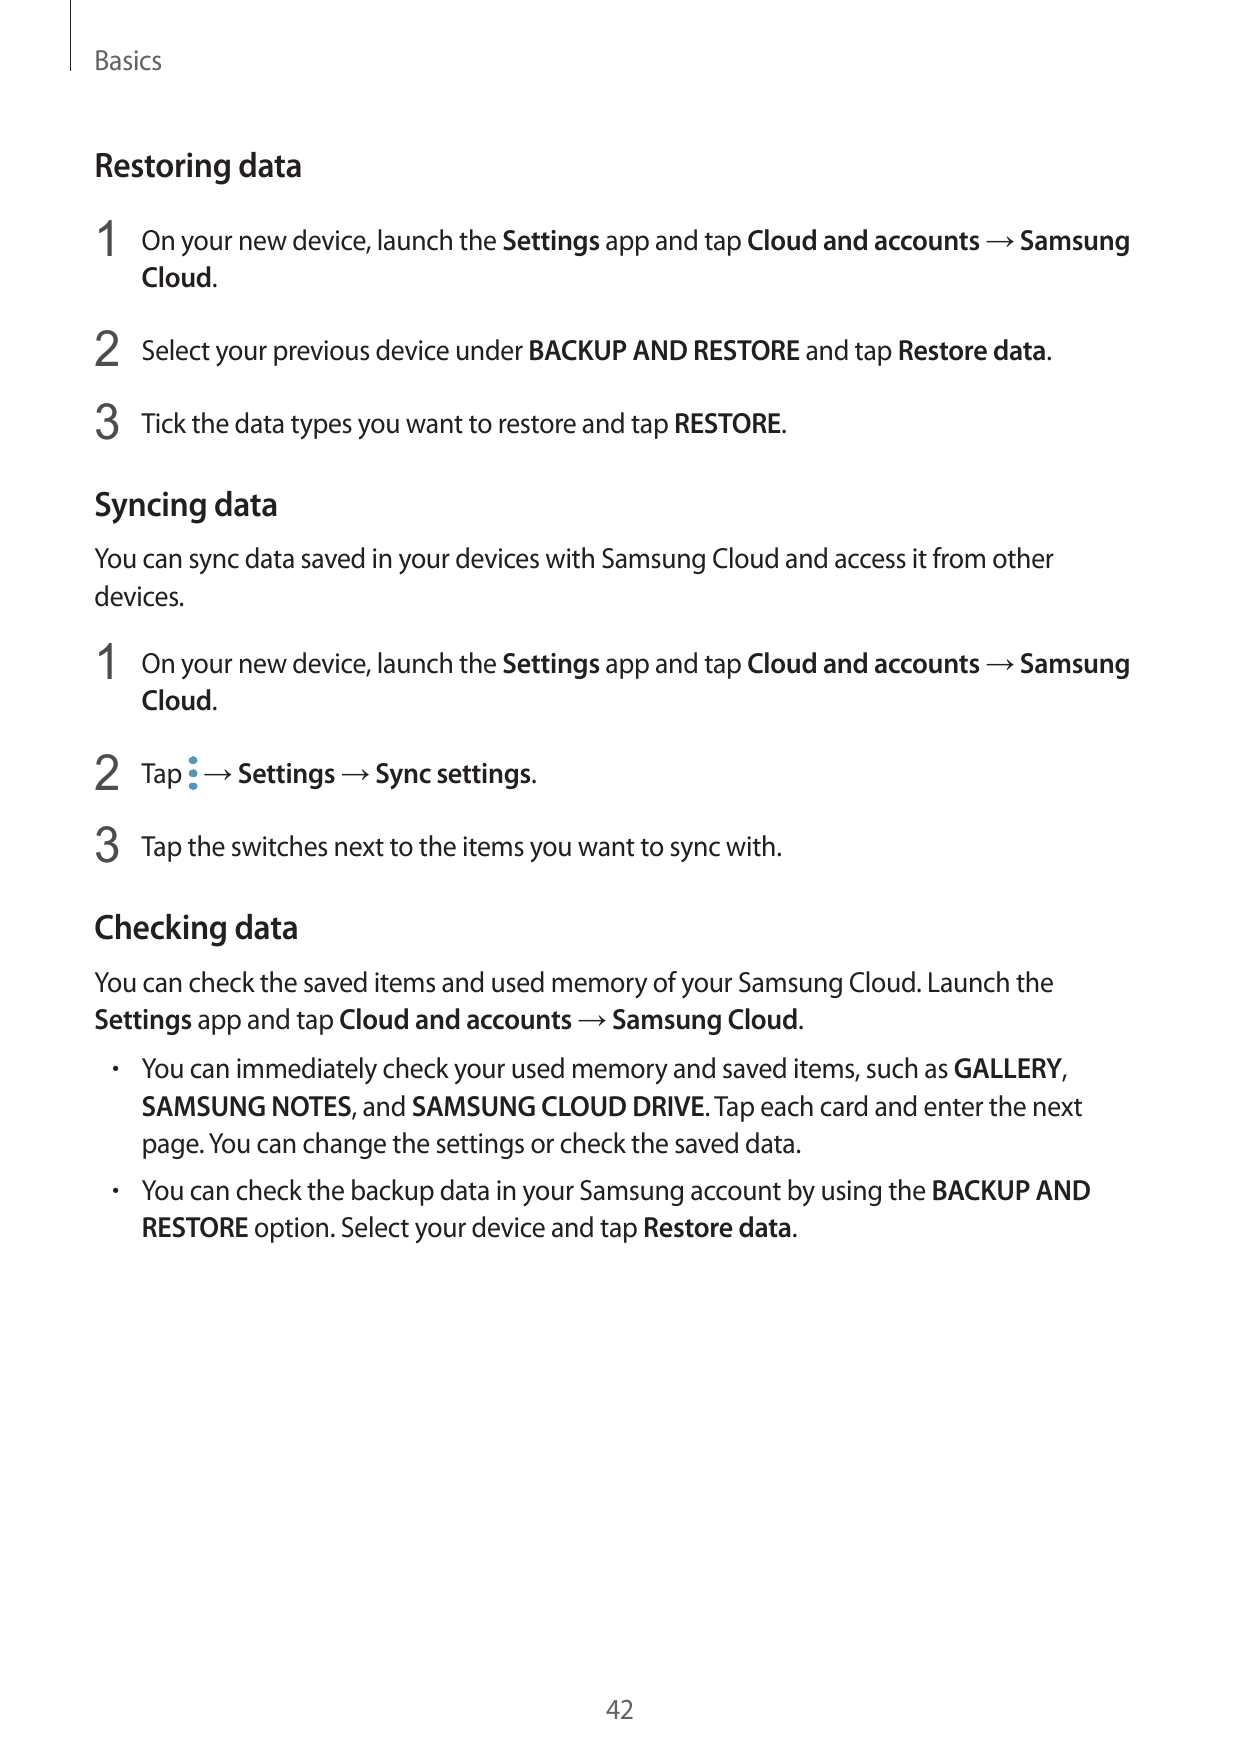 BasicsRestoring data1 On your new device, launch the Settings app and tap Cloud and accounts → SamsungCloud.2 Select your previo